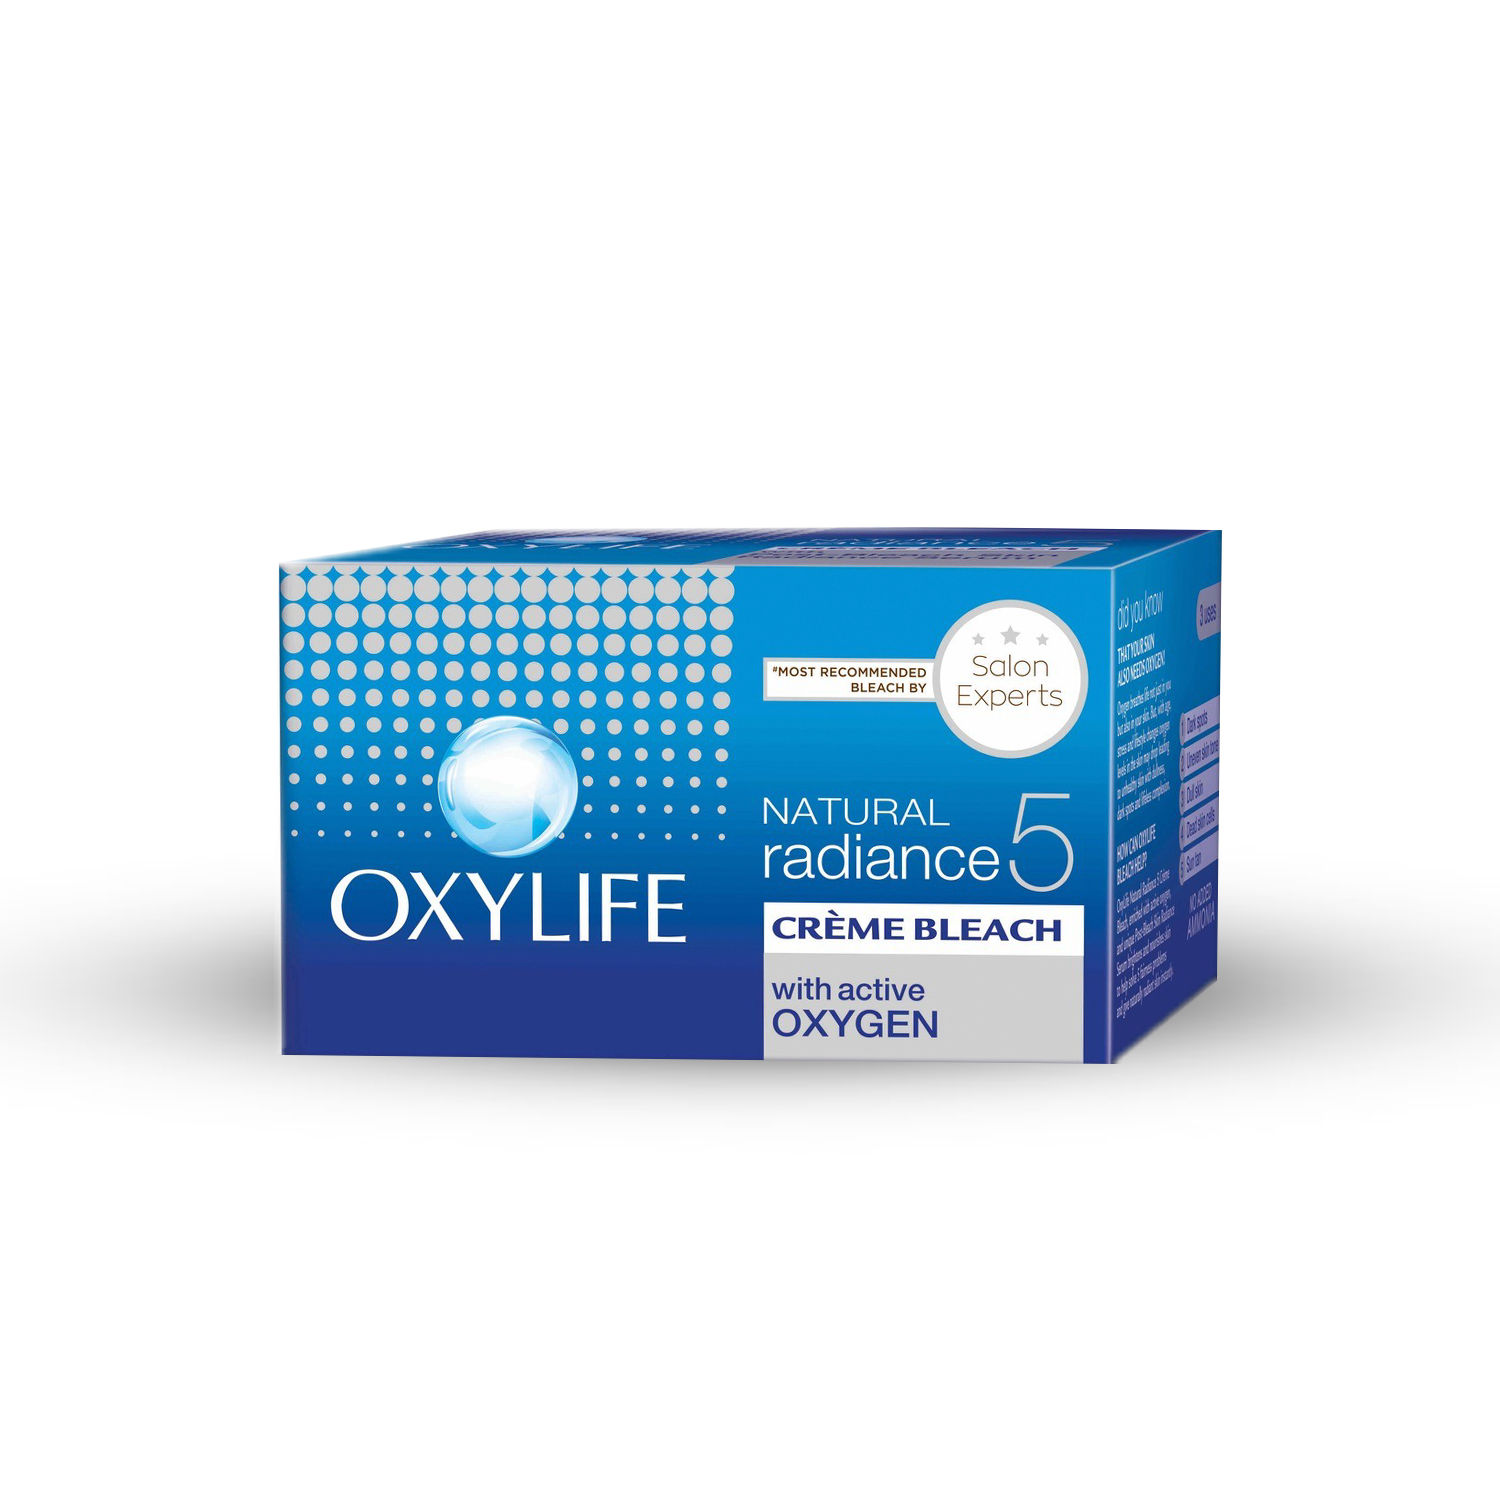 OxyLife Natural Radiance 5 Creme Bleach